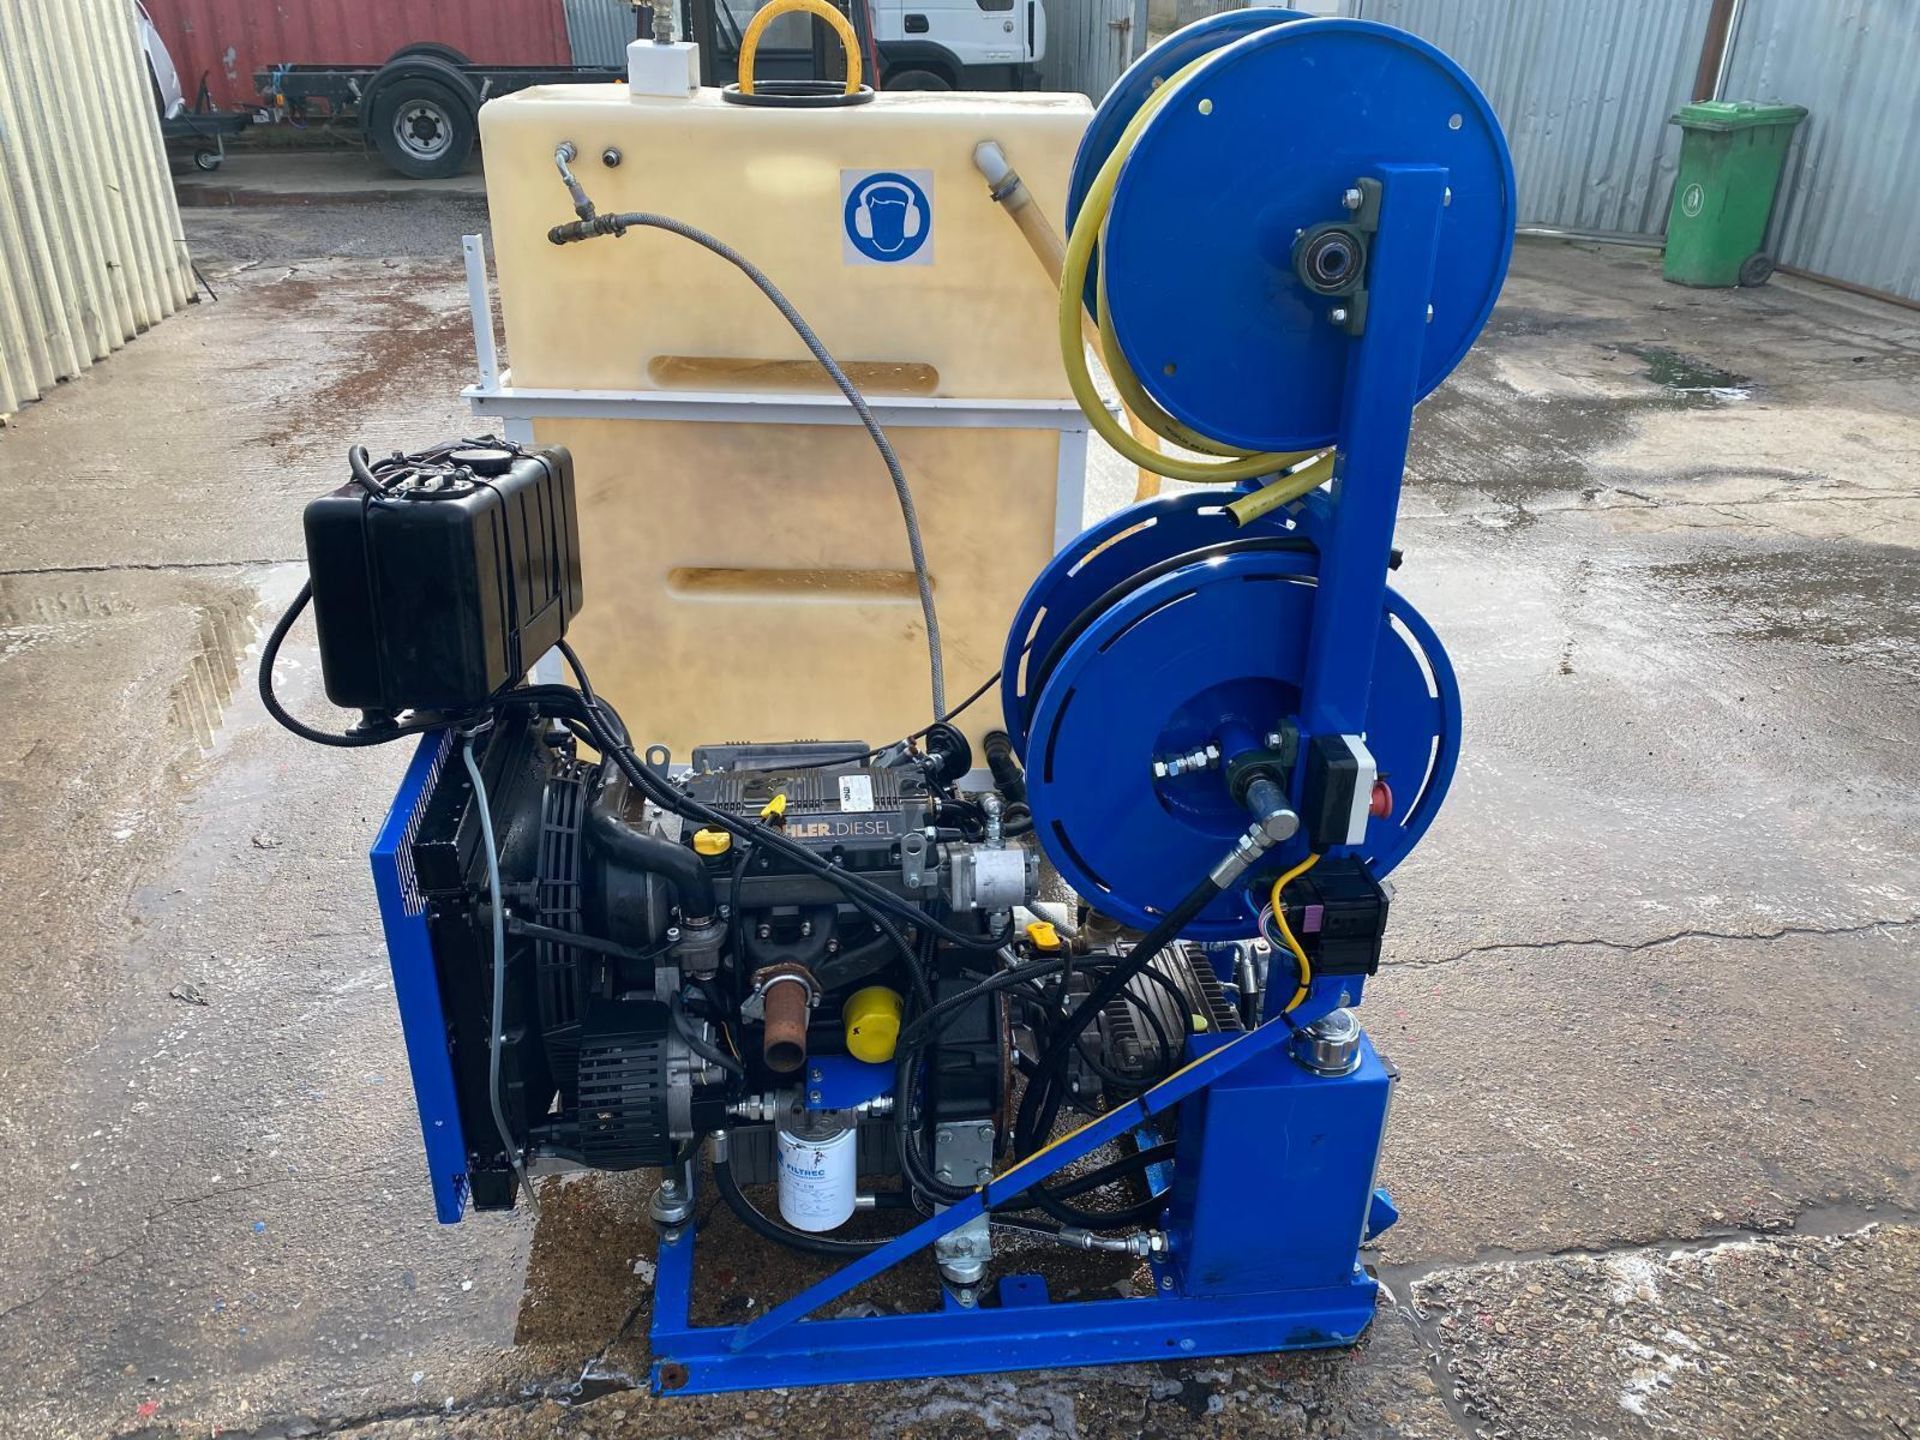 RIONED & ANDY GUEST KOHLER DIESEL HIGH-PRESSURE JETTER WITH WATER TANK (NO VAT ON HAMMER)